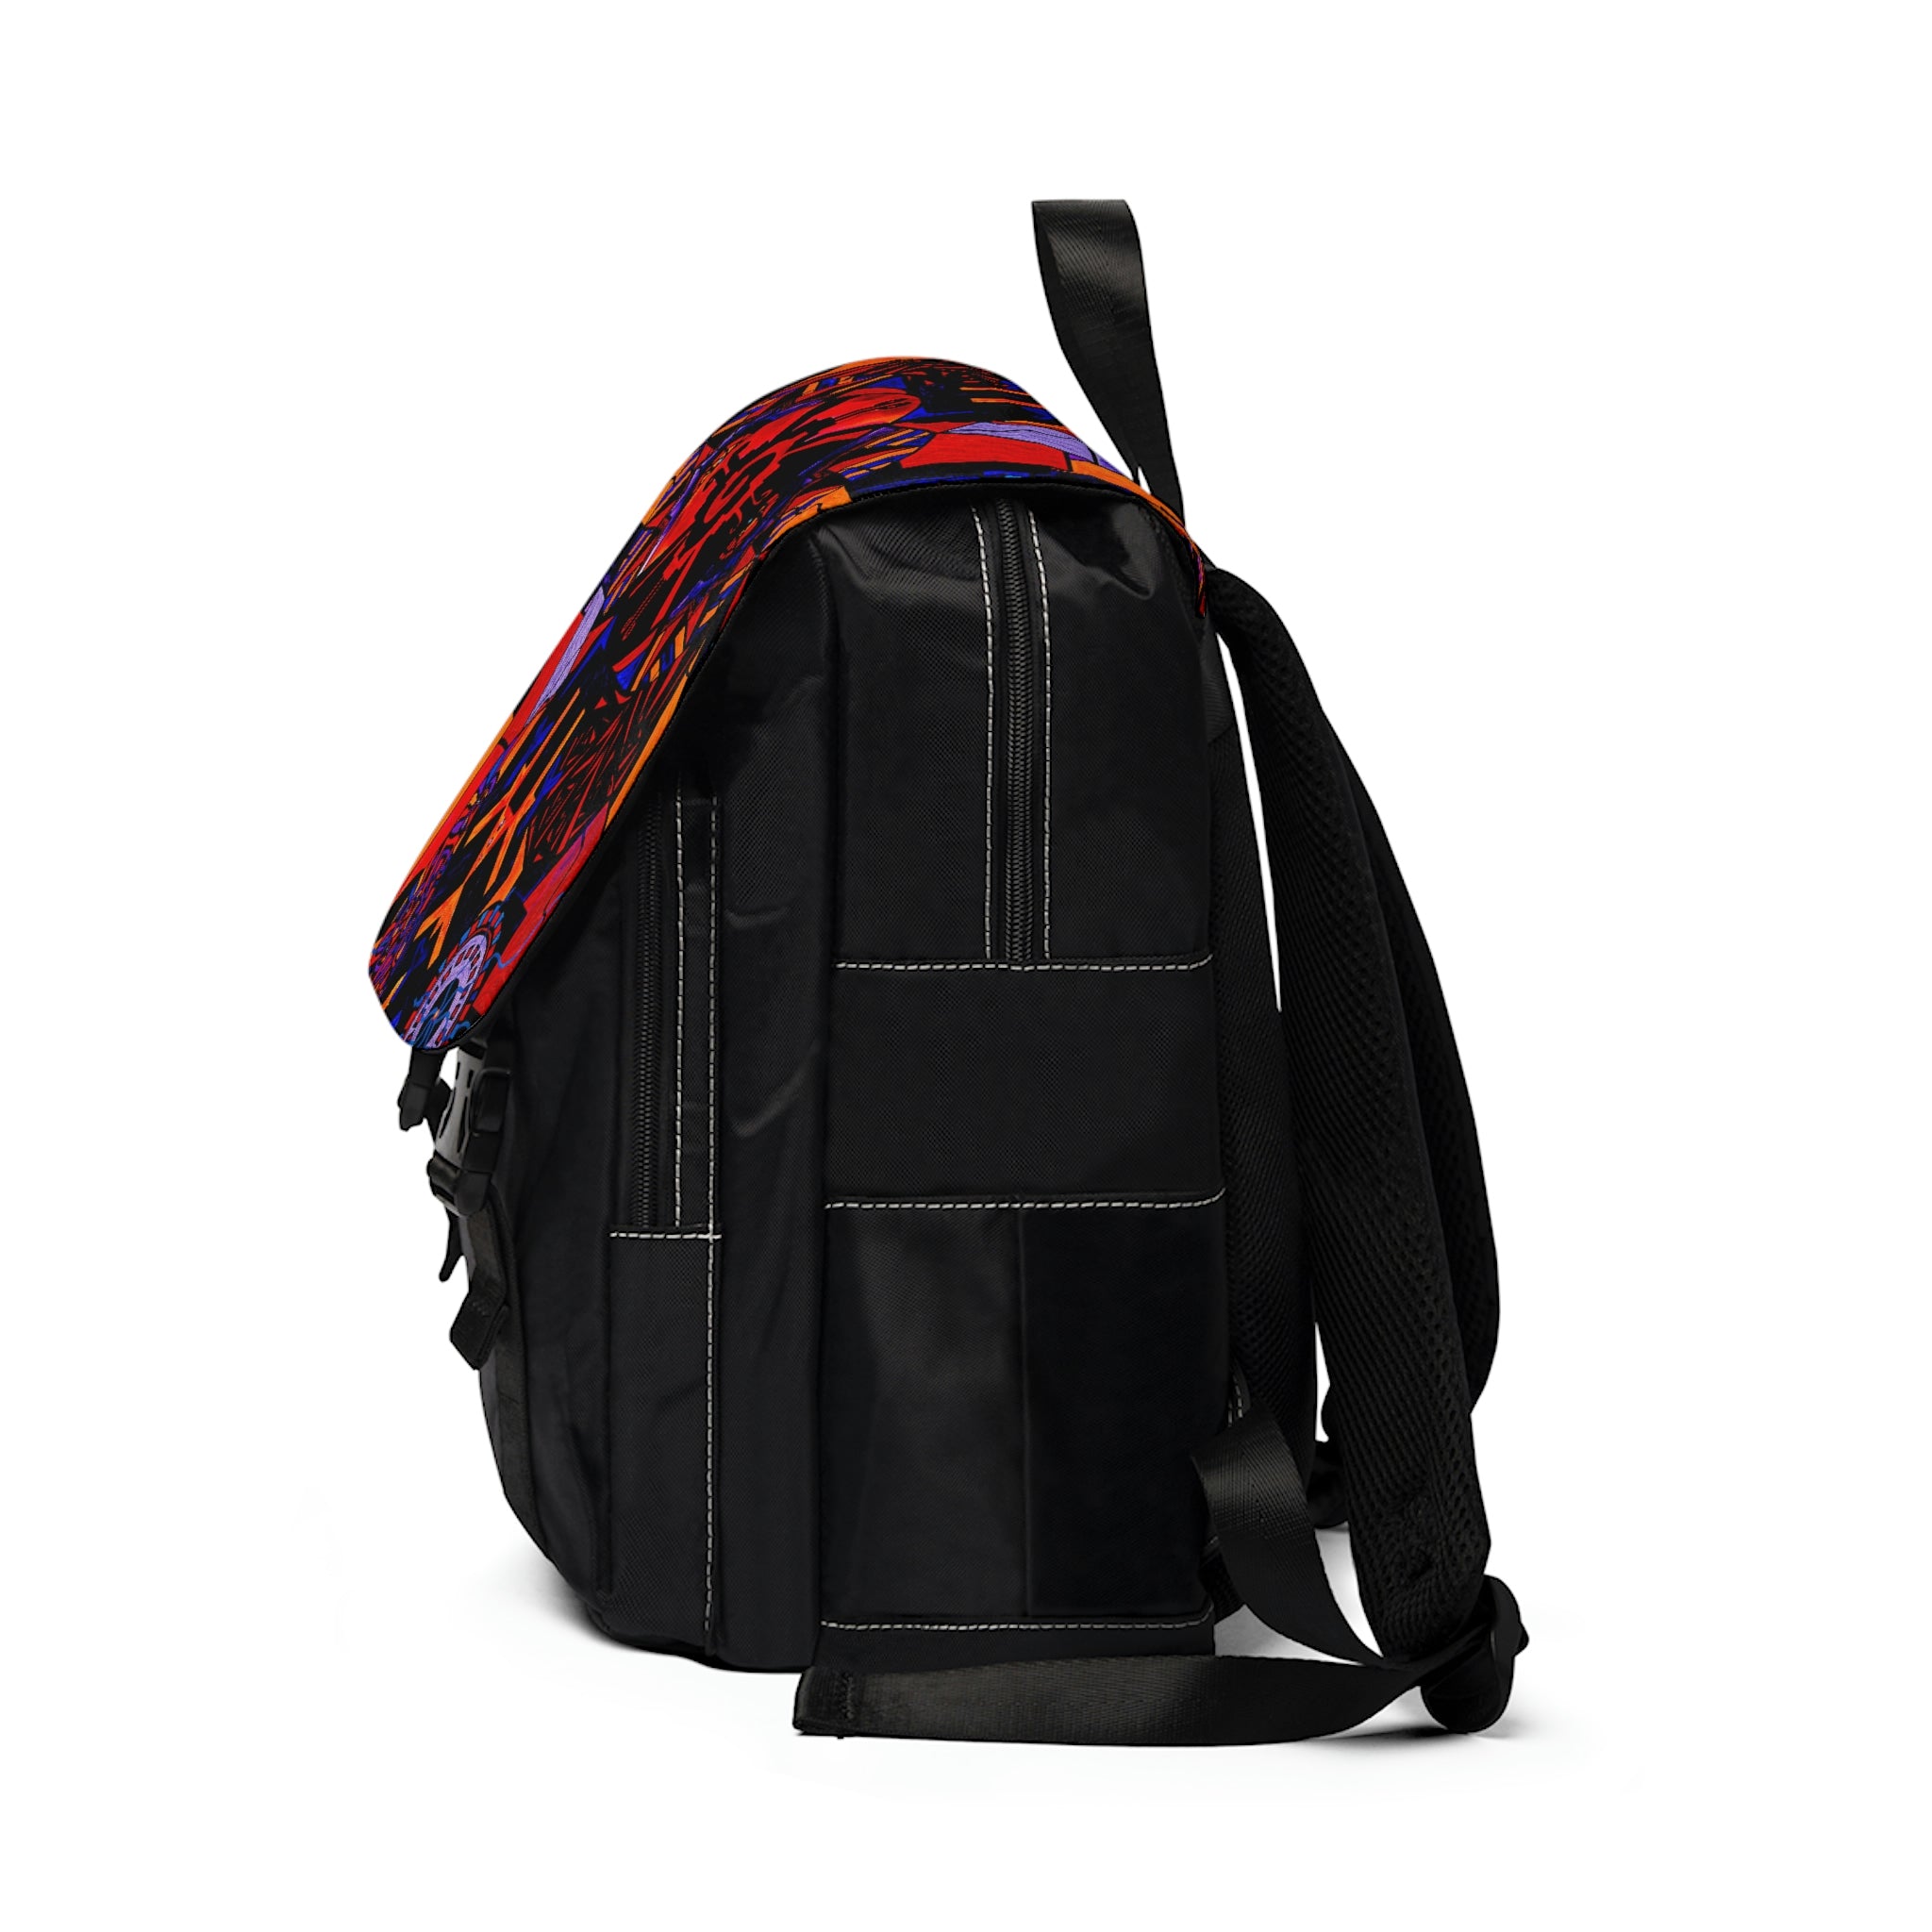 we-believe-in-helping-you-find-the-perfect-alnilam-strength-grid-unisex-casual-shoulder-backpack-fashion_2.jpg